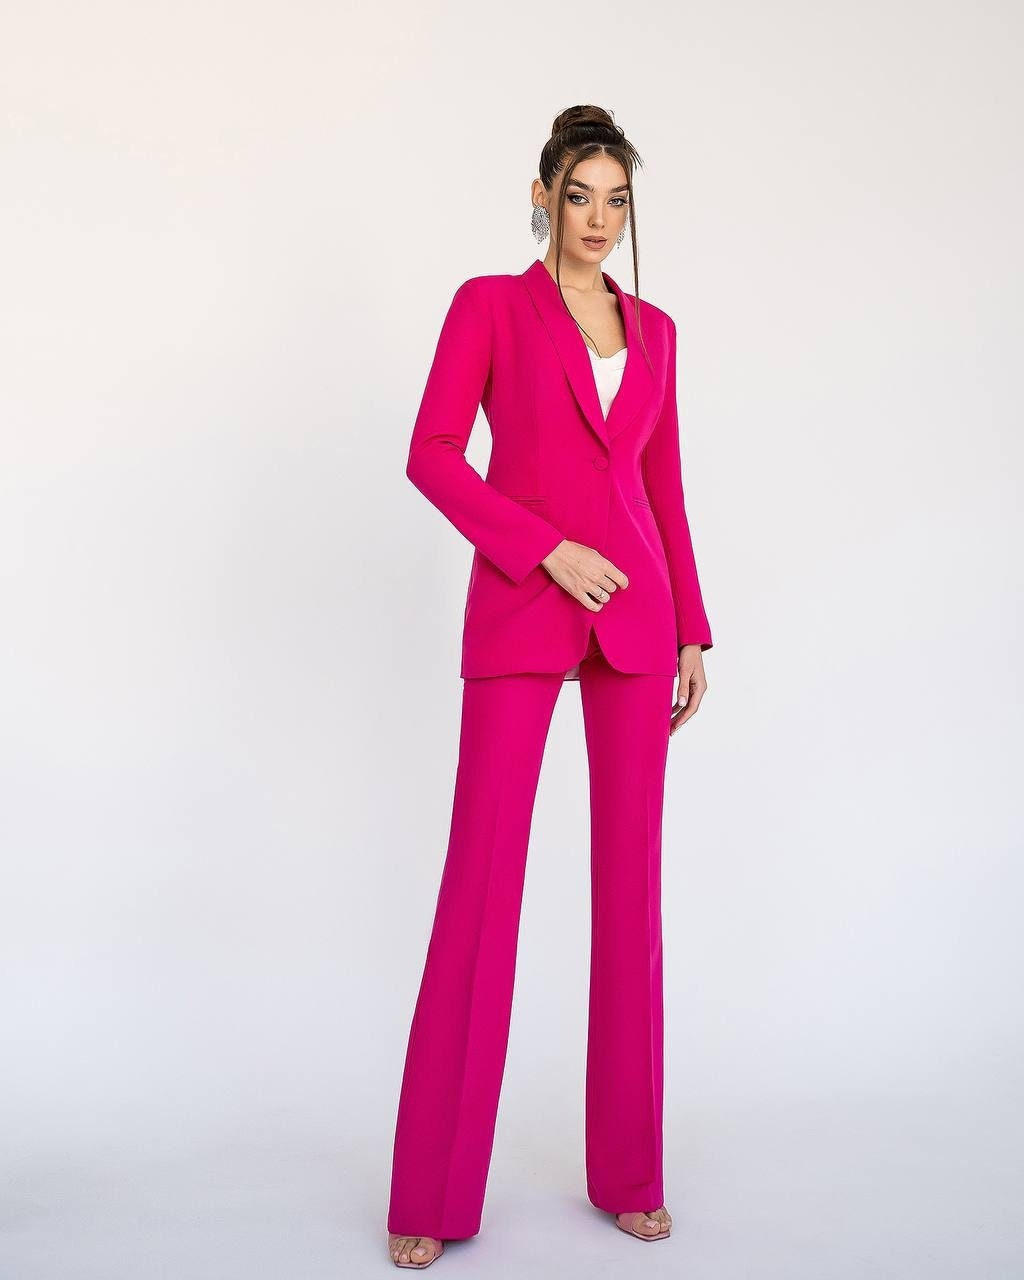 Hot Pink Pants Suit for Women With Flared Pants 